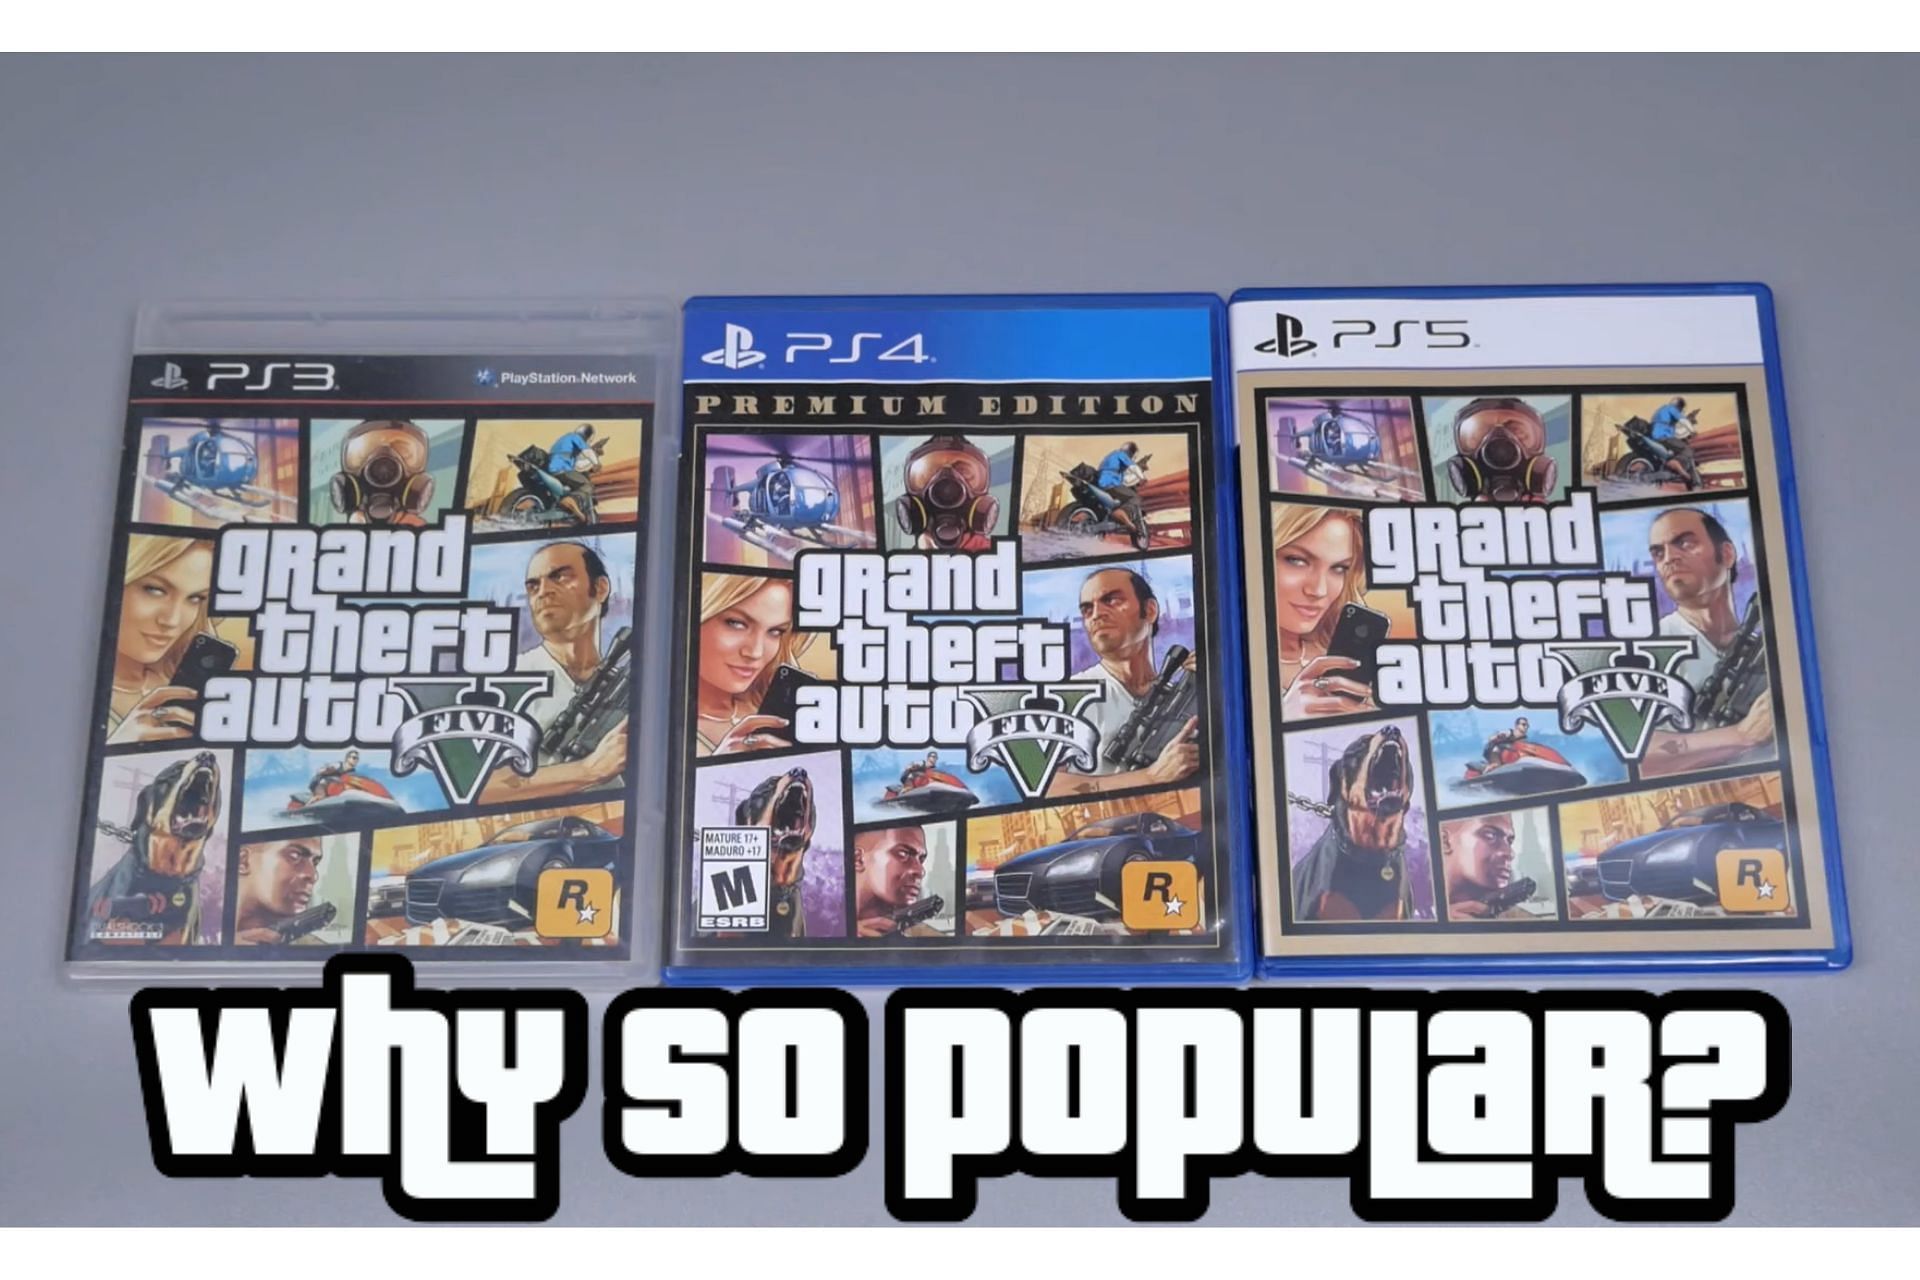 Top 5 reasons why GTA Online is still a huge success 7 years after